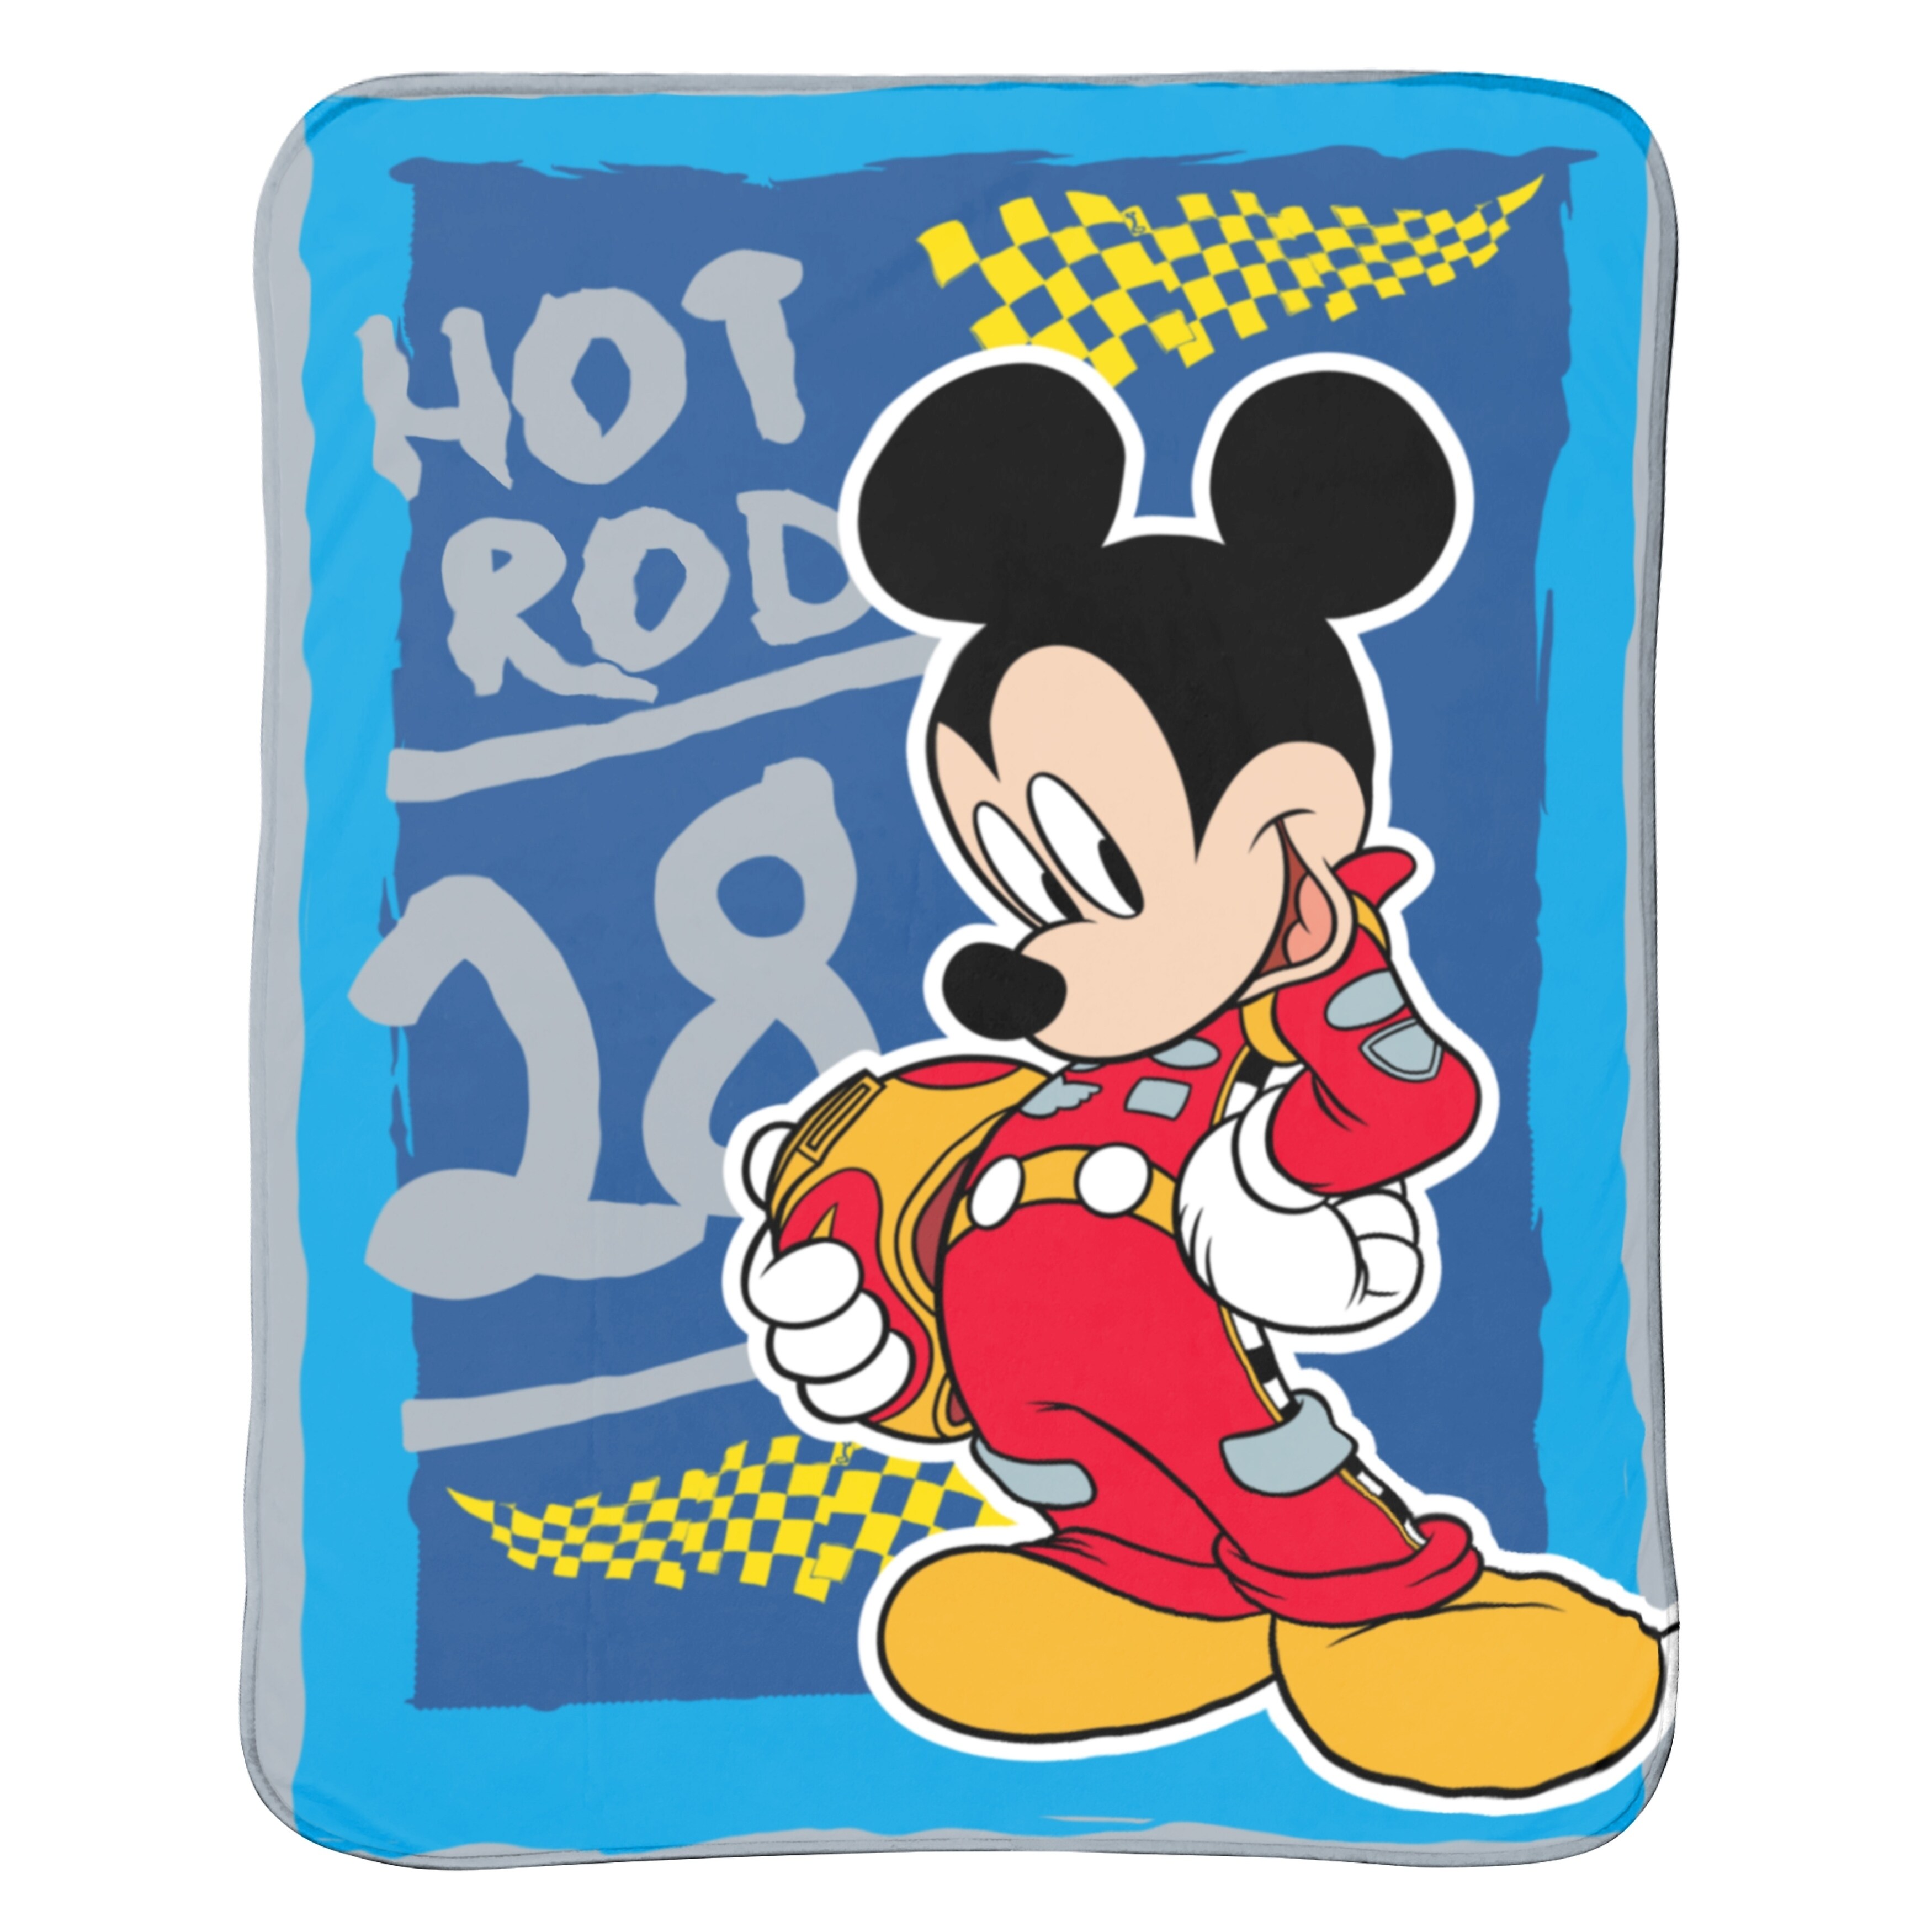 Disney Mickey Mouse Clubhouse Roadster Racer Plush Throw Overstock 24265347